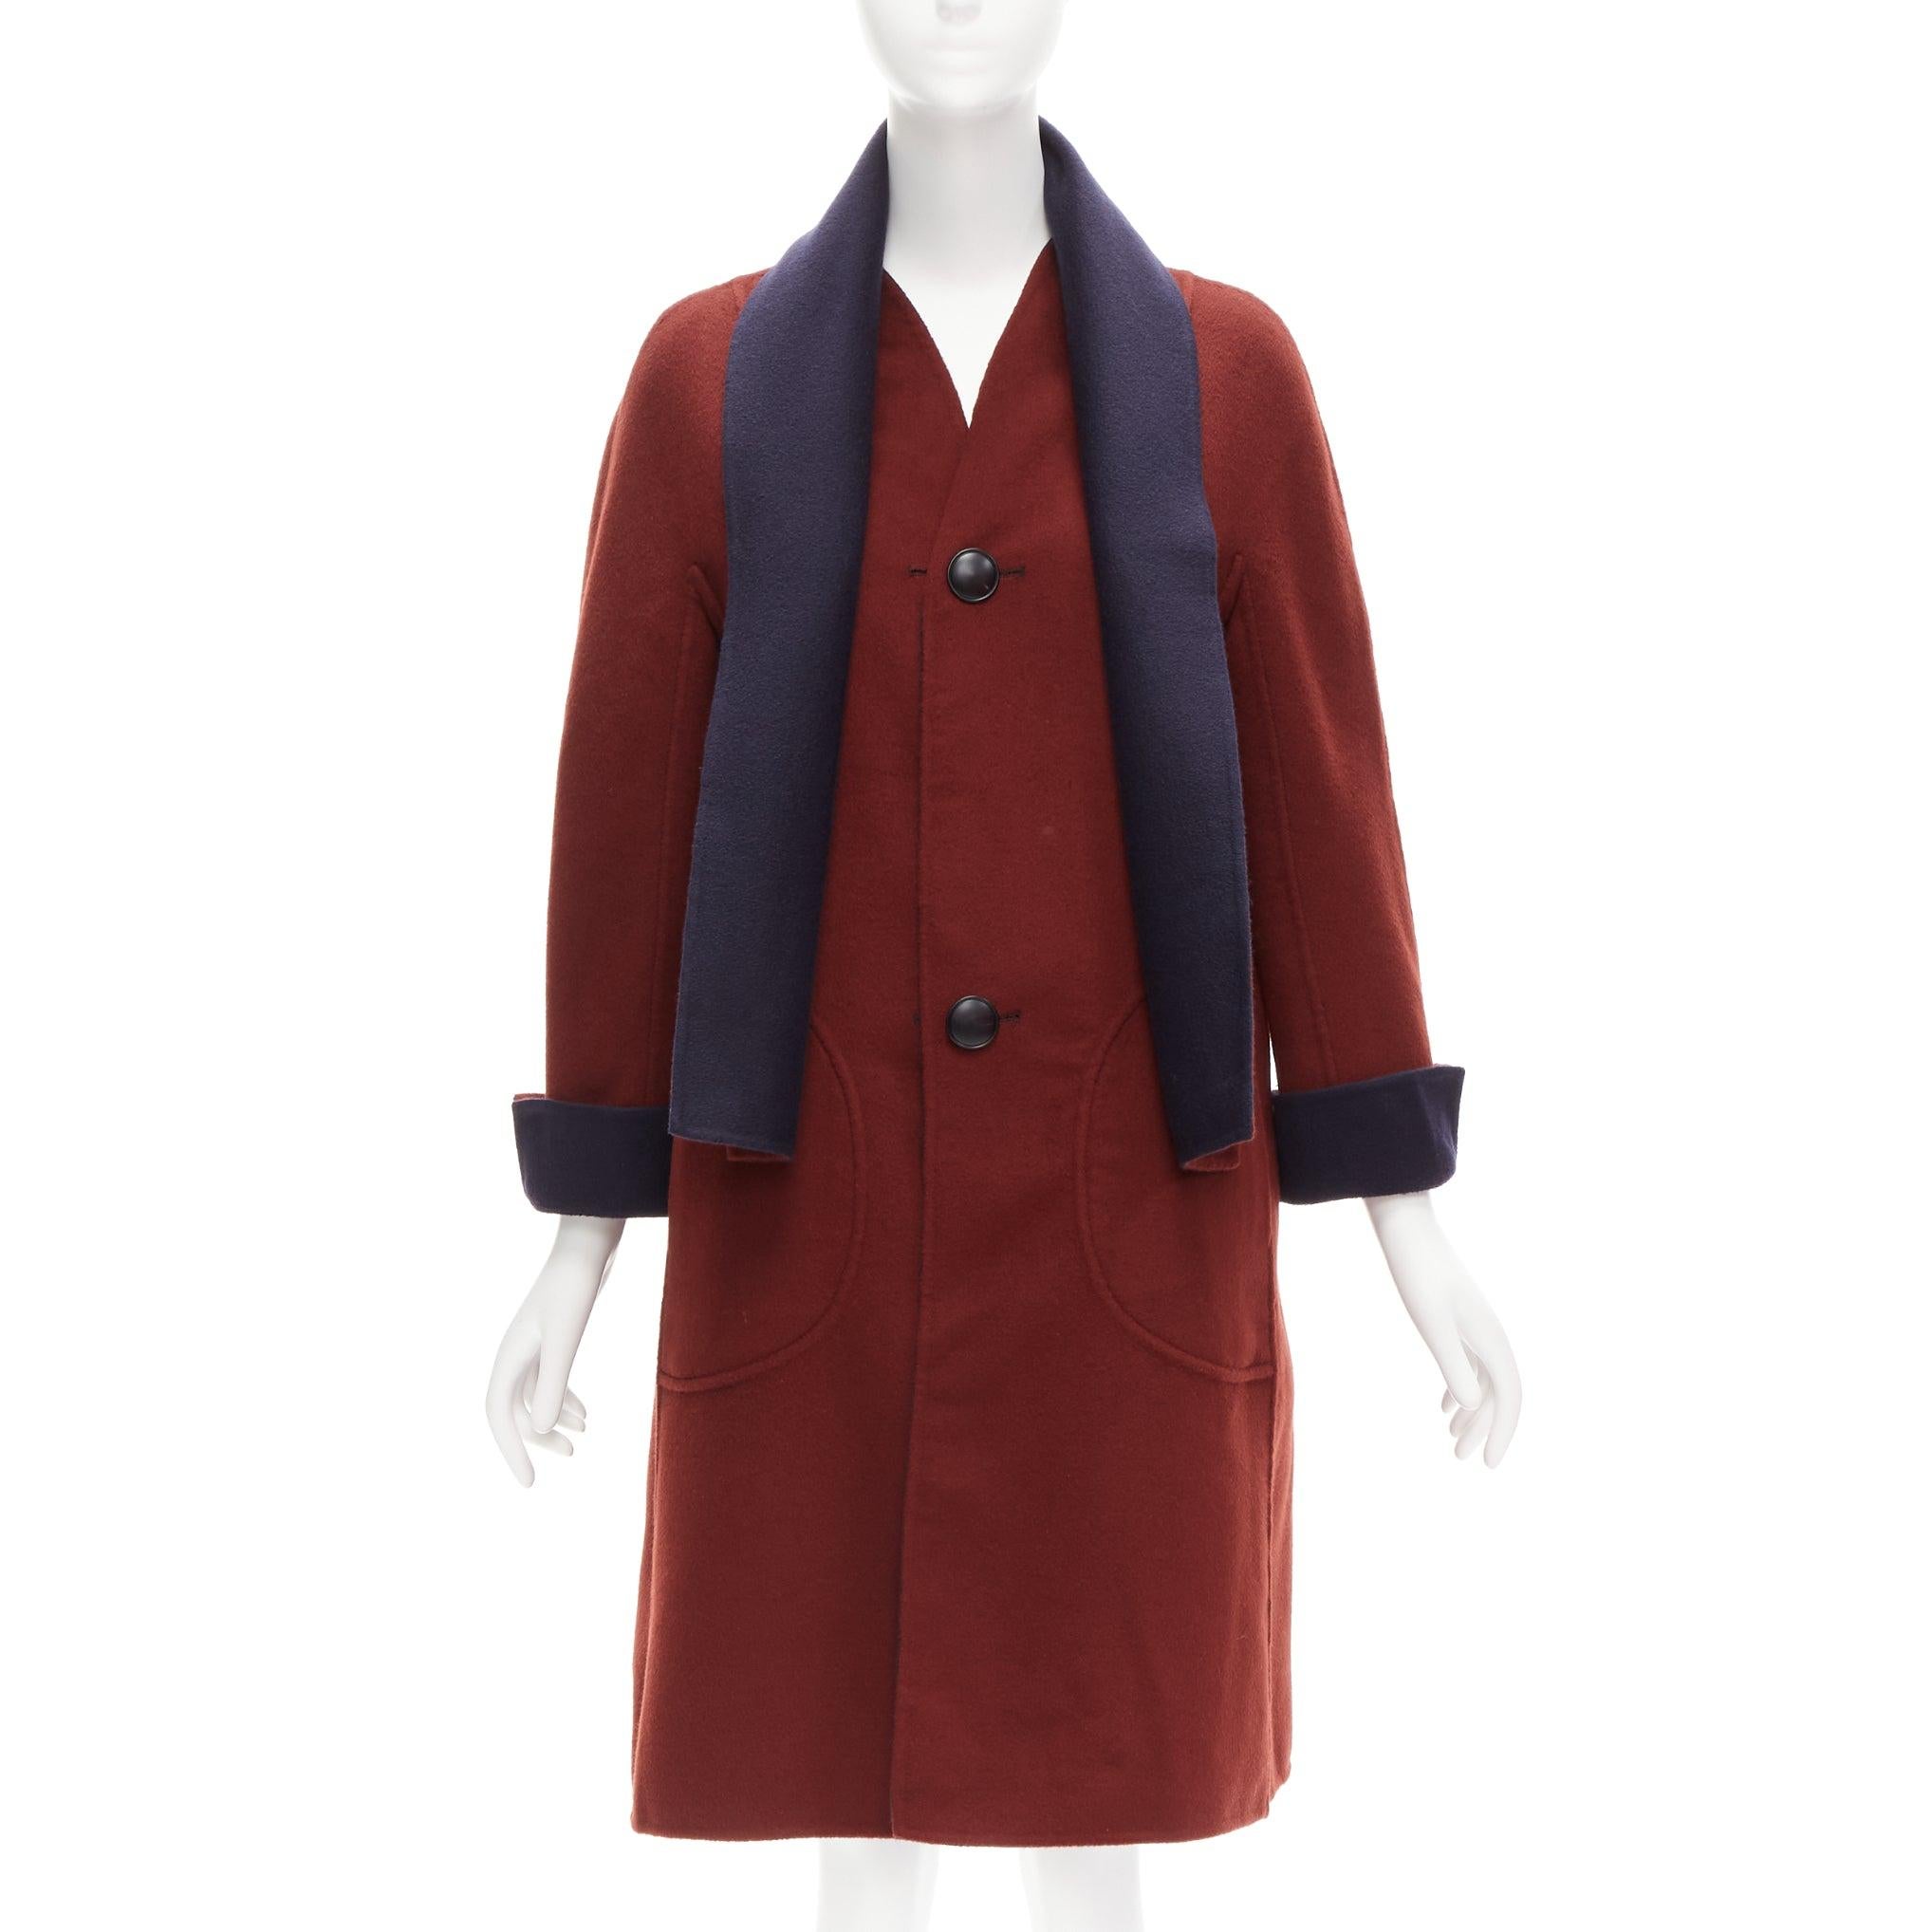 LORO PIANA 100% double faced cashmere burgundy navy Reversible coat IT44 L
Reference: TGAS/D00967
Brand: Loro Piana
Material: Cashmere
Color: Burgundy, Navy
Pattern: Solid
Closure: Button
Lining: Burgundy Cashmere
Extra Details: Double face premium